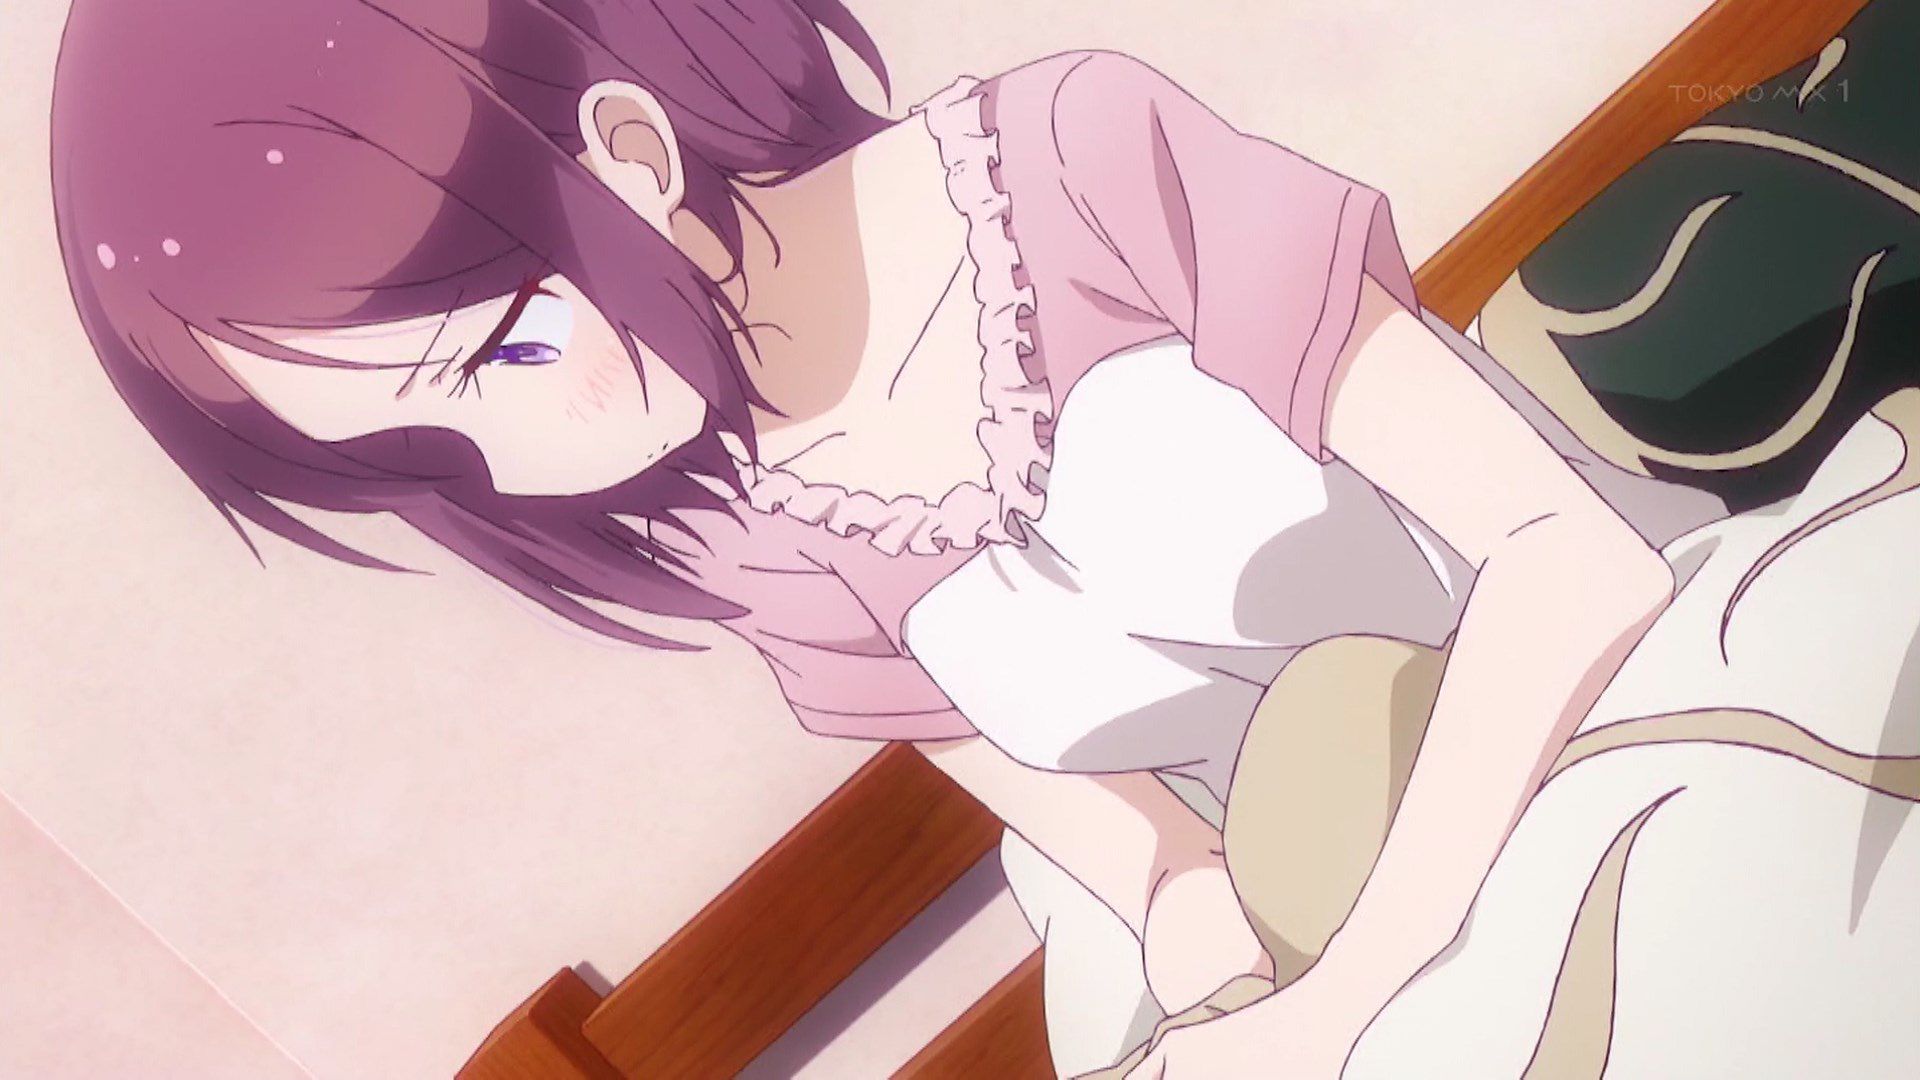 [Artificial mouth times] "NEW GAME! "Of all nine episodes, Yuri hifumi nude too たまらな of wwwwwwwww 12